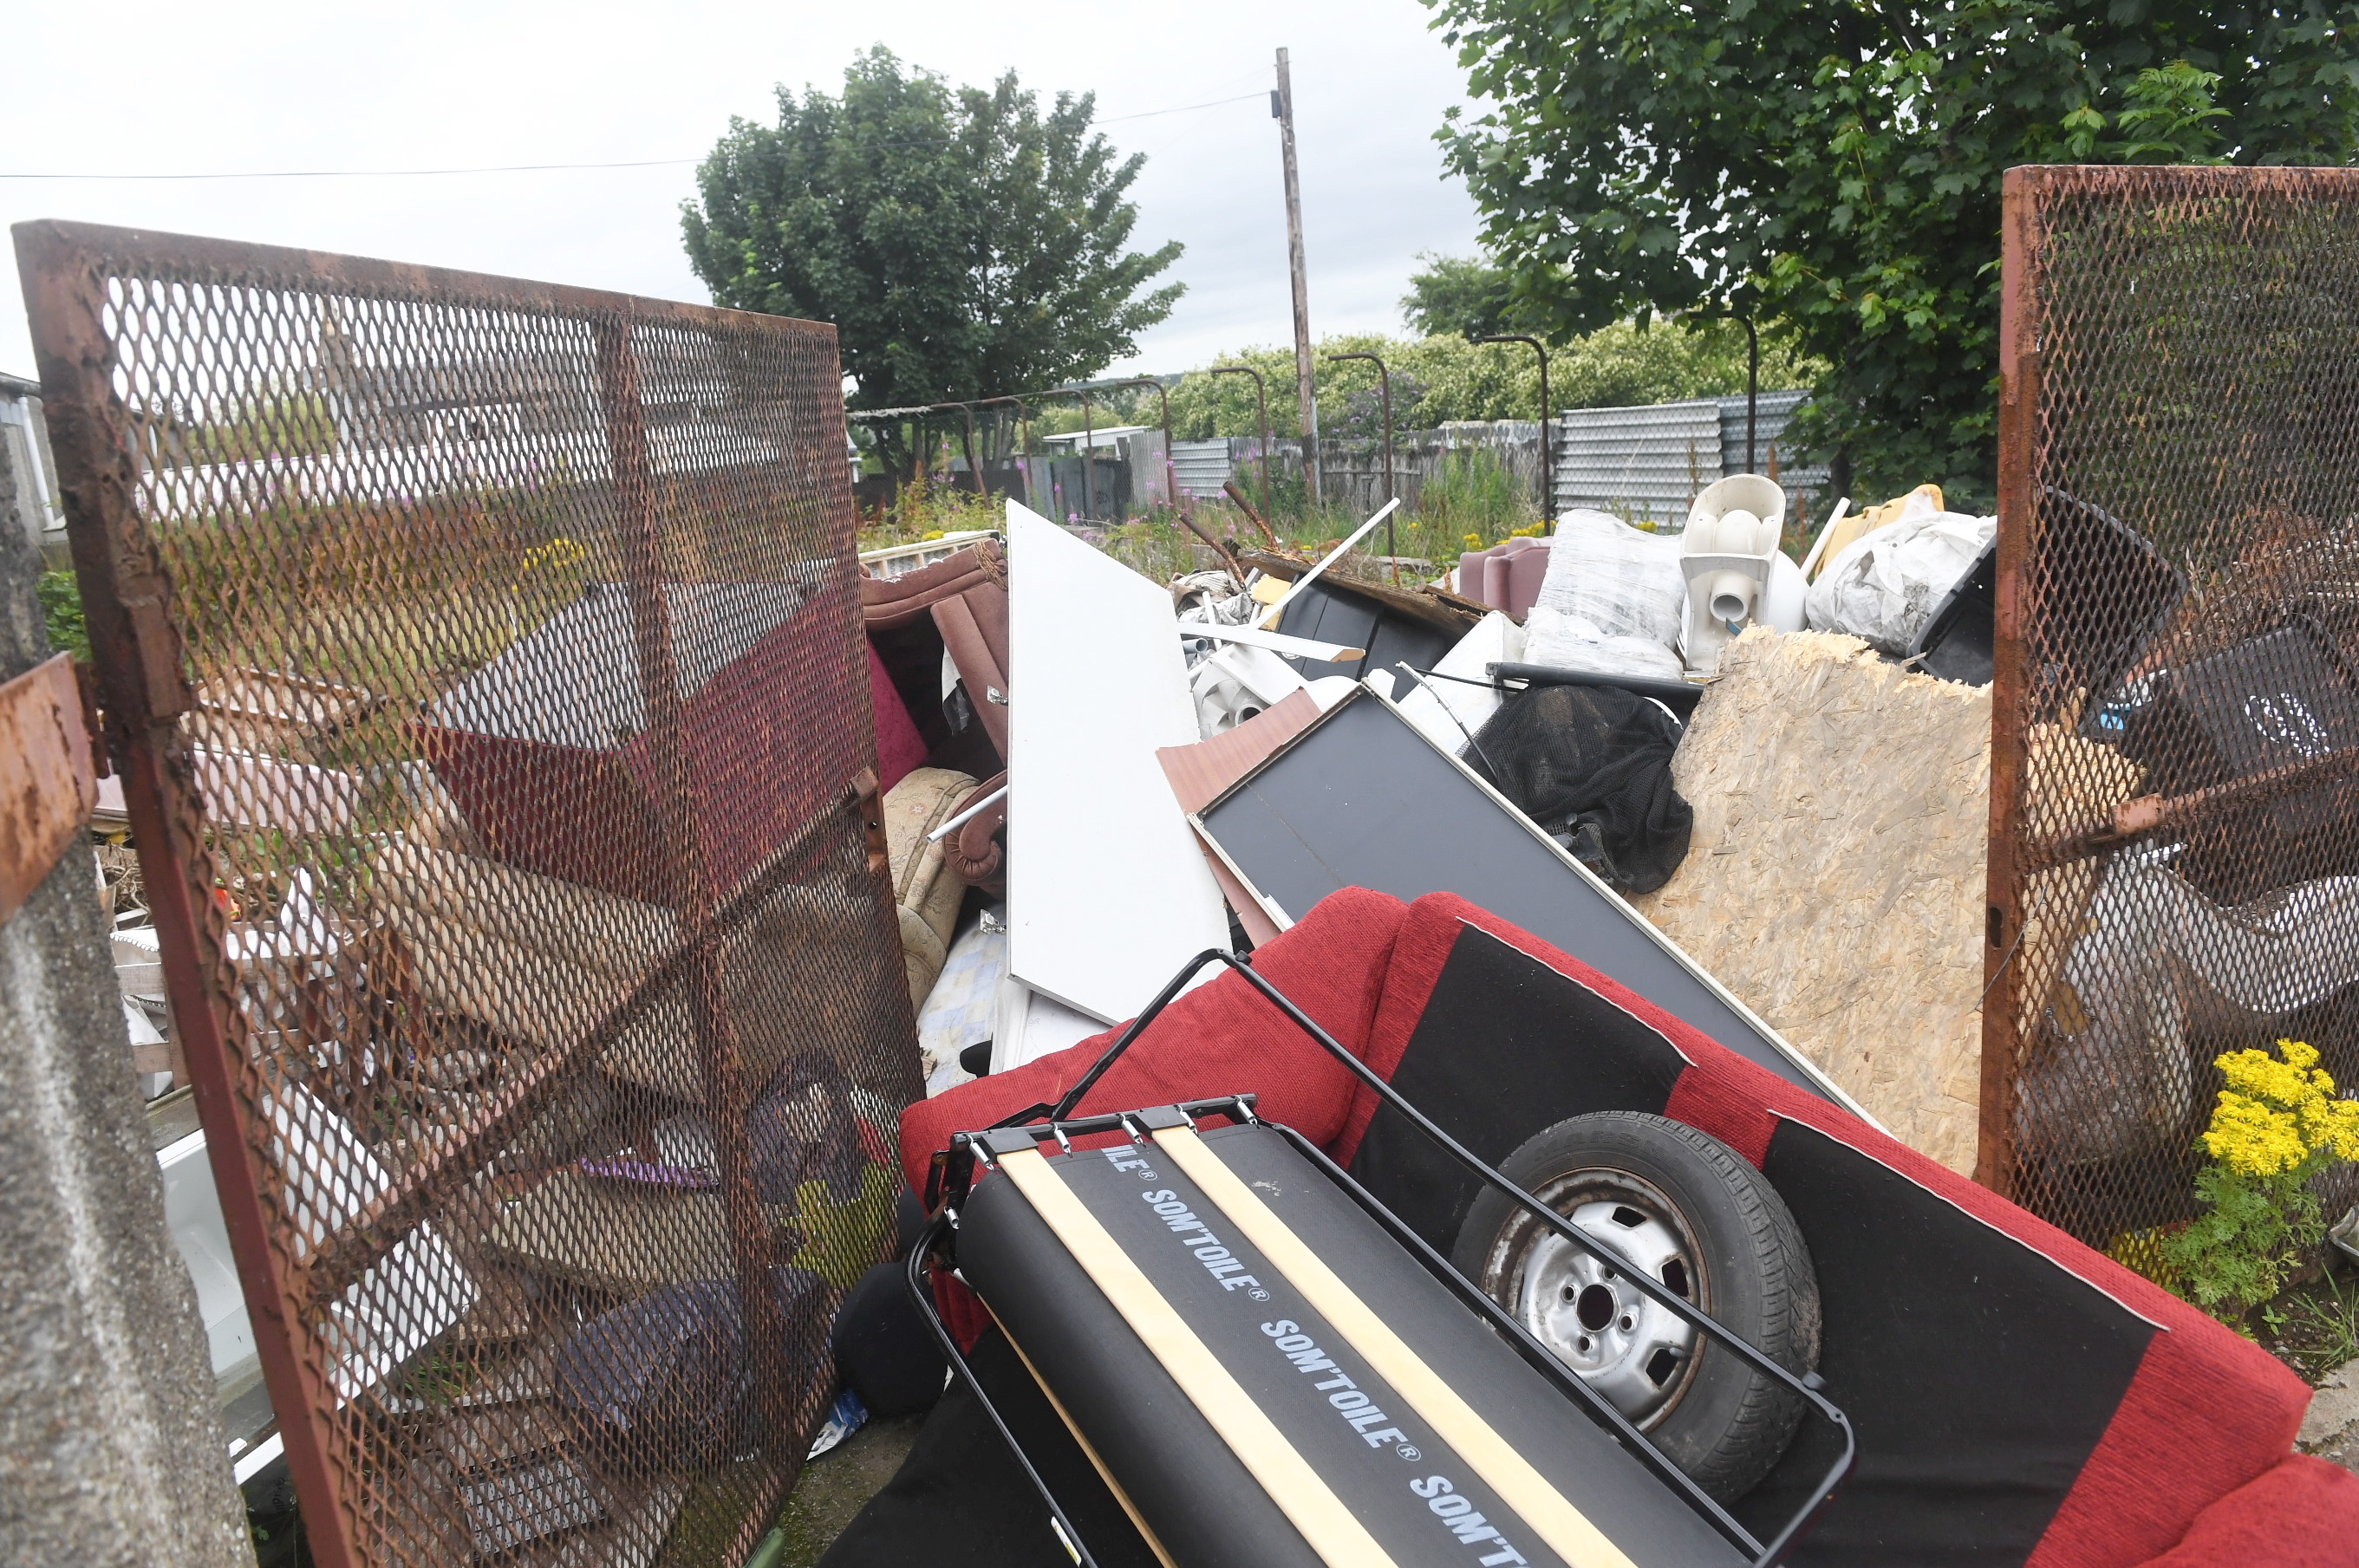 Fly tipping on Don Street, Tillydrone.
Picture by Chris Sumner.